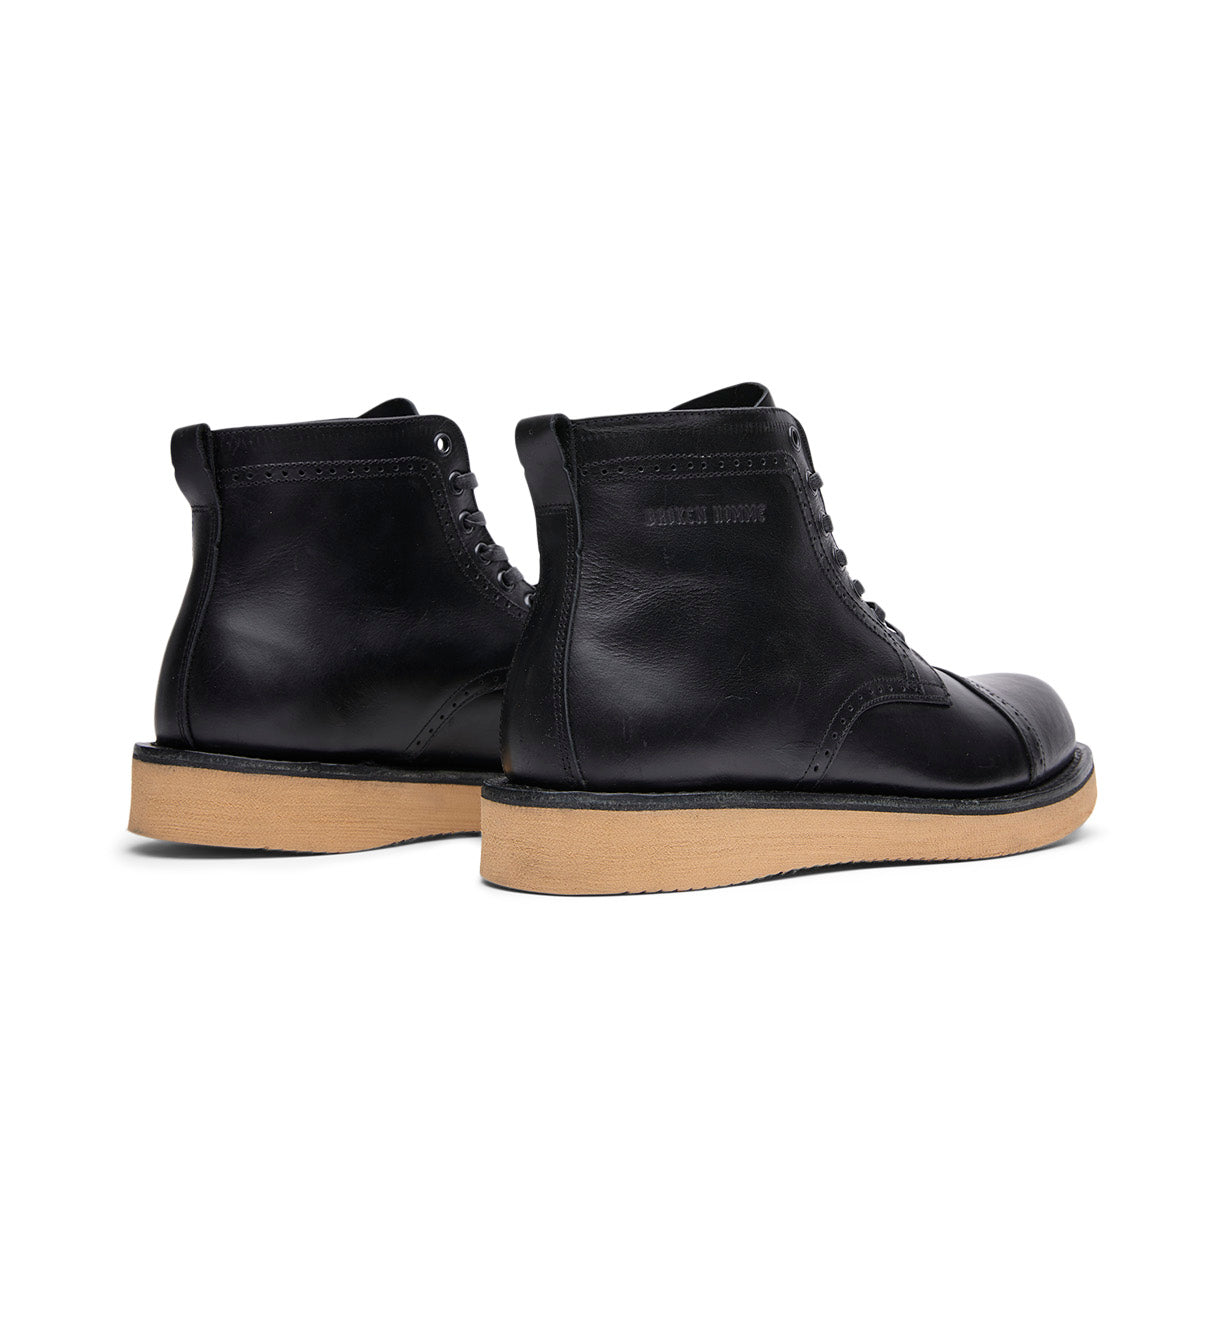 A pair of black leather Broken Homme Shaun boots featuring a goodyear welt, photographed on a white background.